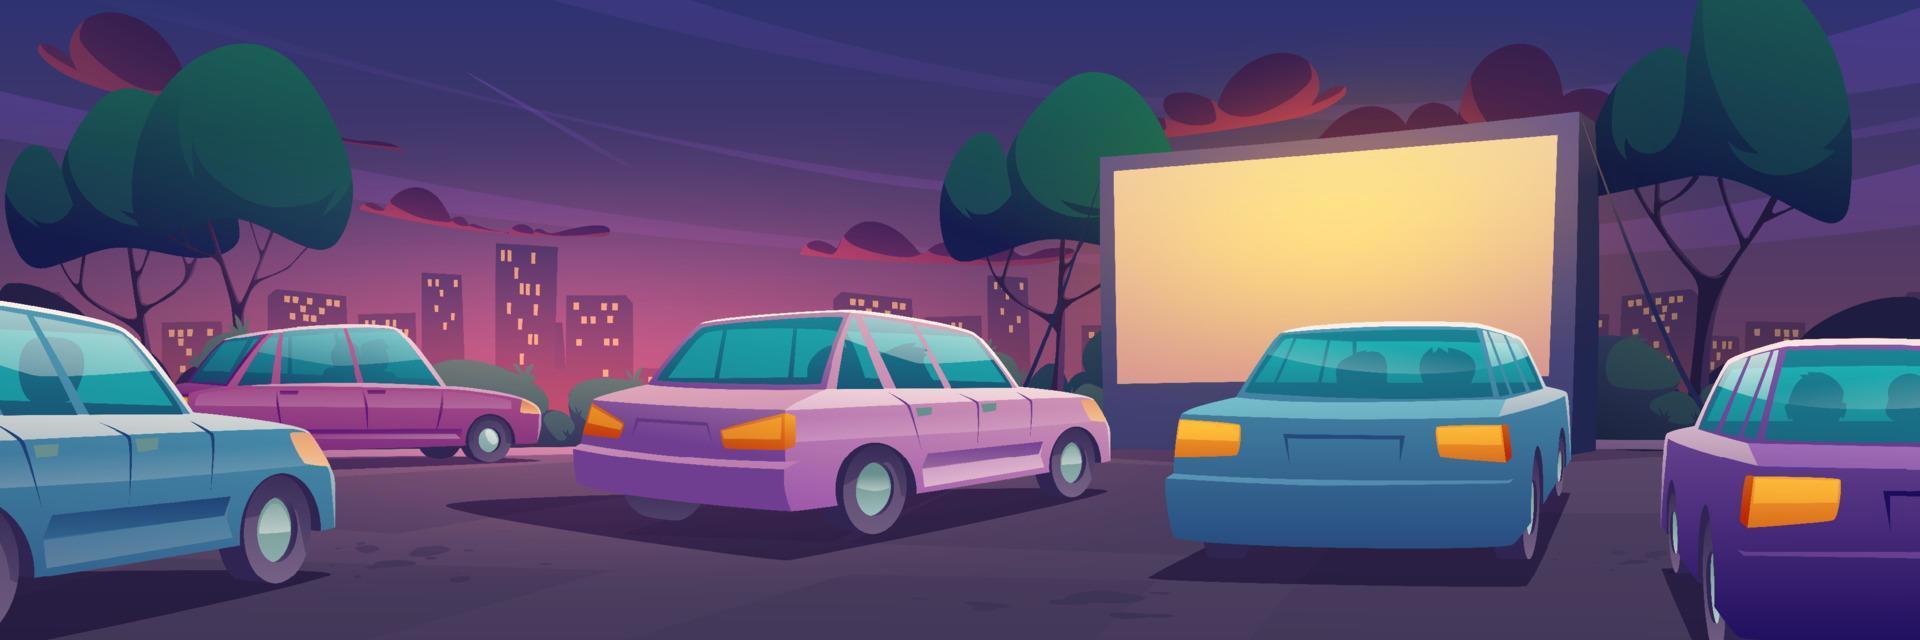 Drive-in movie theater with cars on parking vector